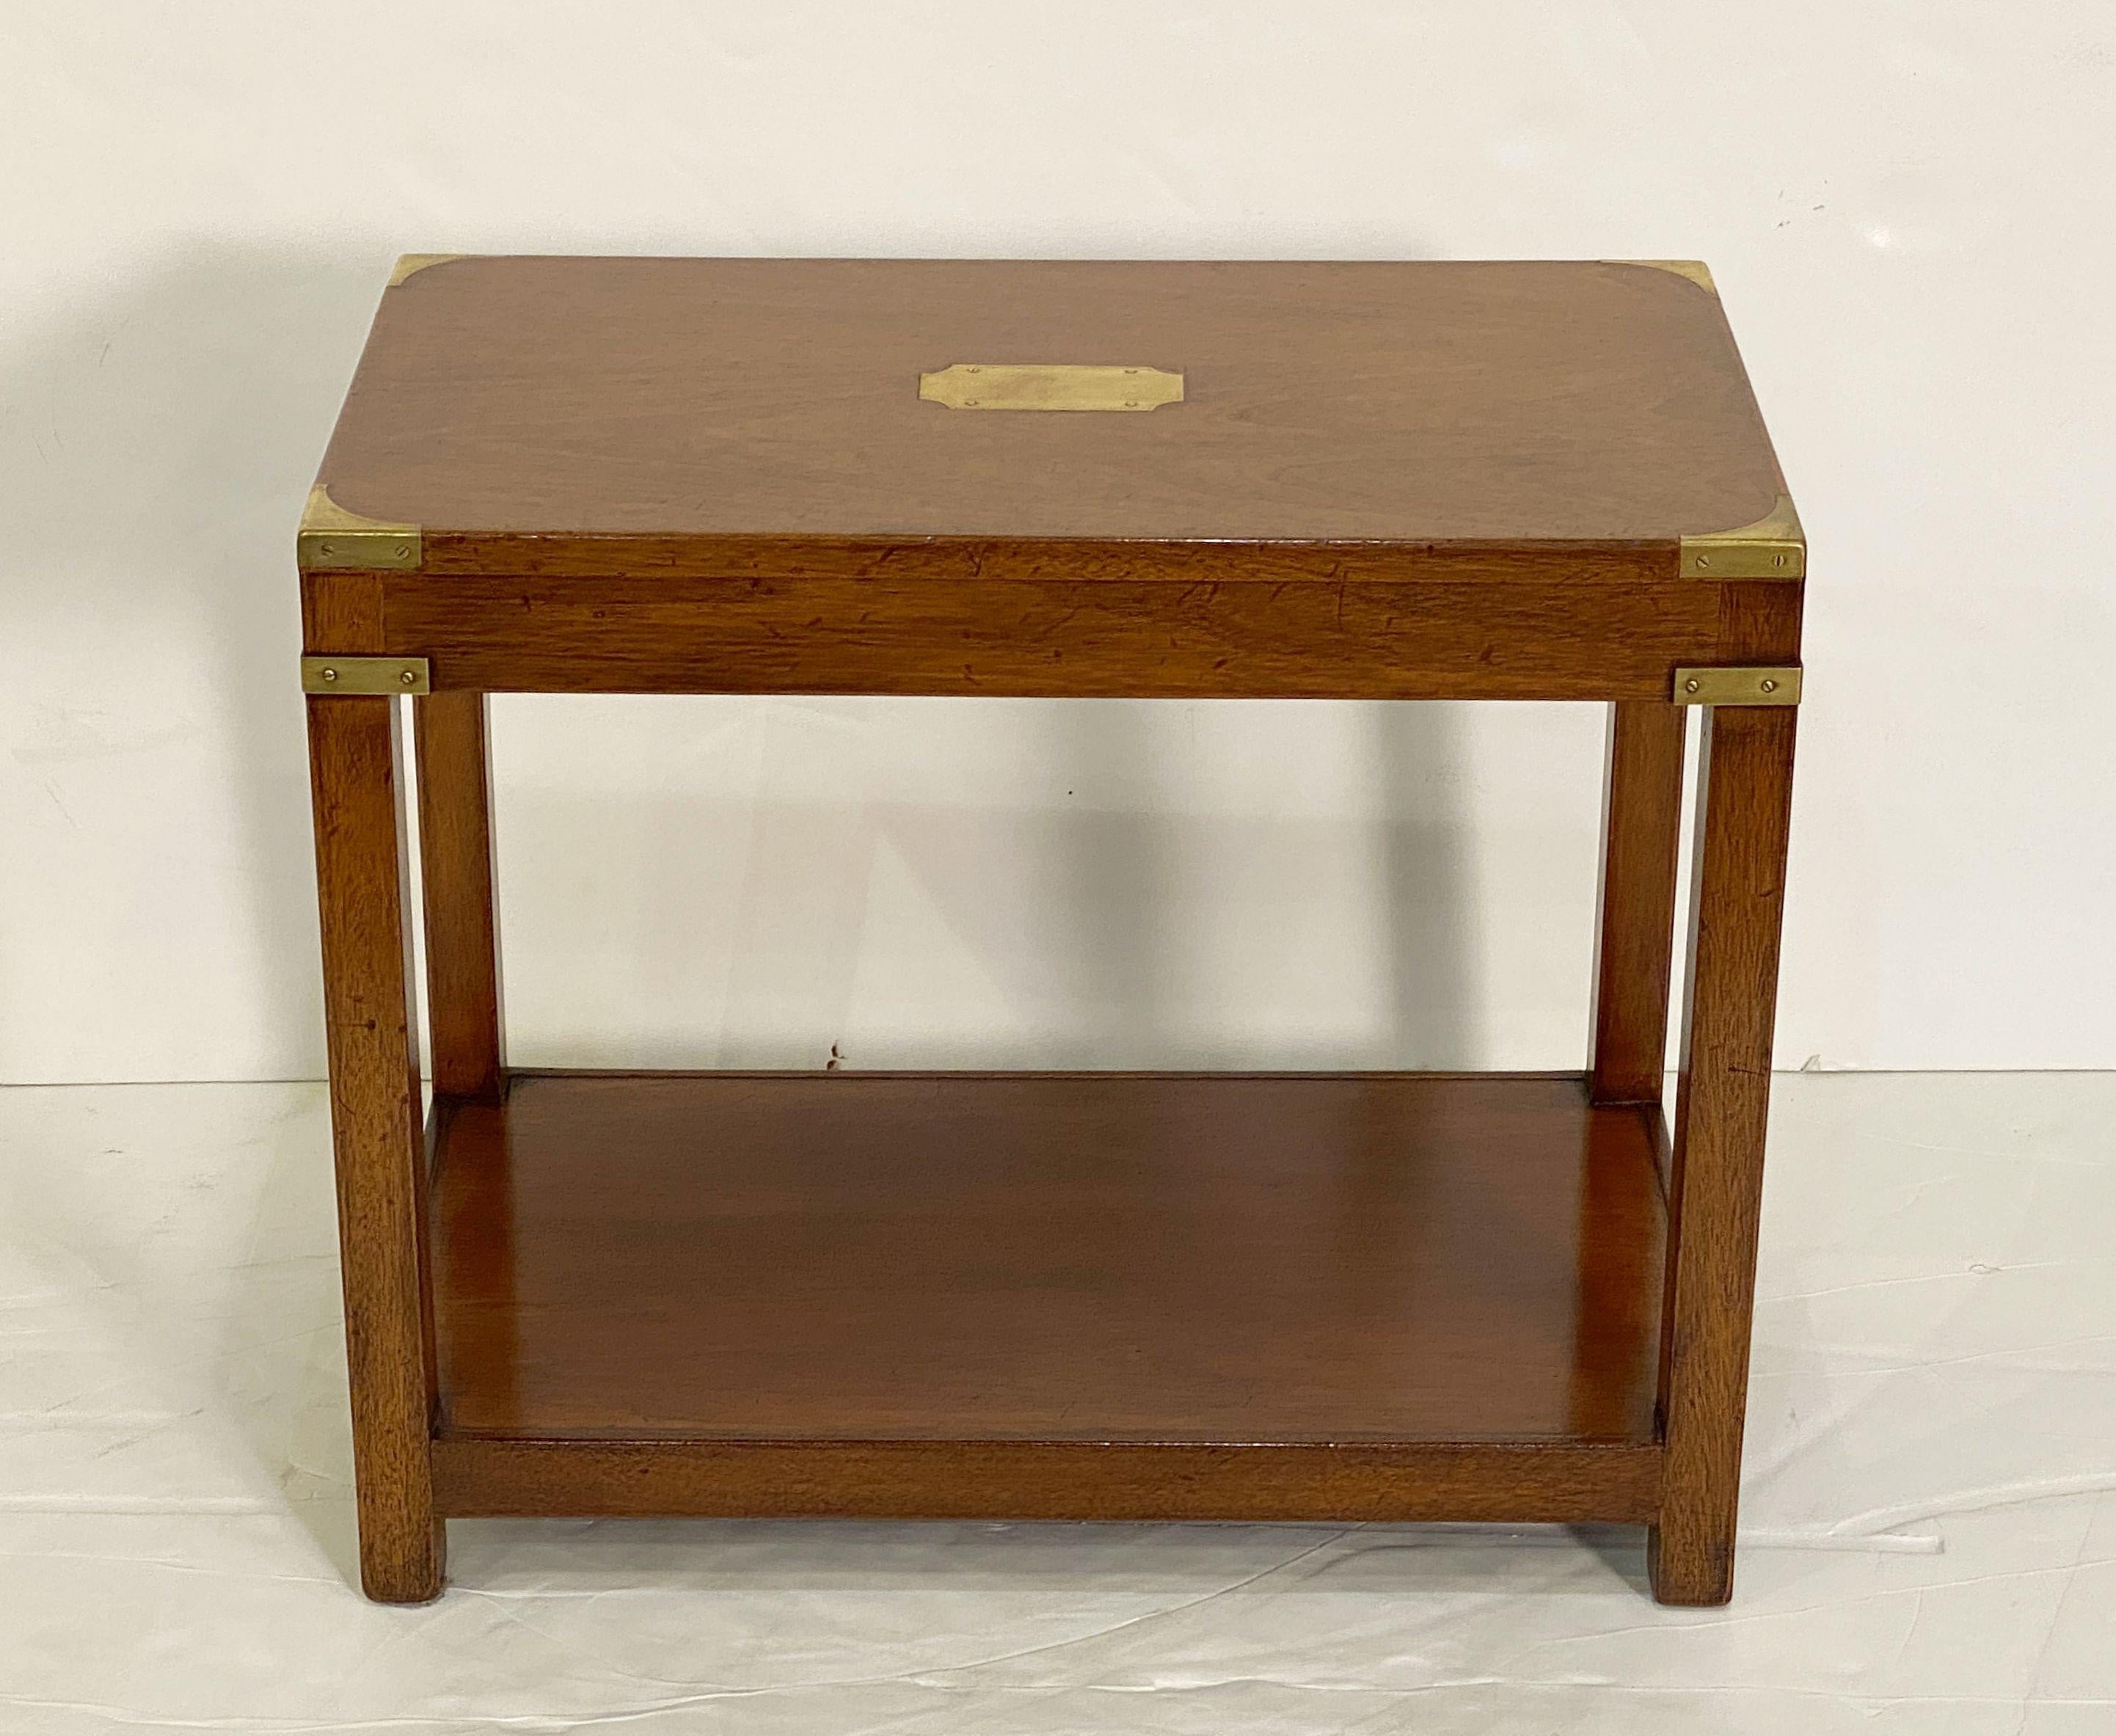 A fine British Campaign style two-tiered rectangular side or end table of patinated teak featuring hand-cut brass accents on the corners and a brass cartouche in the top center.

Perfect for use as a cocktail (low) or coffee table.